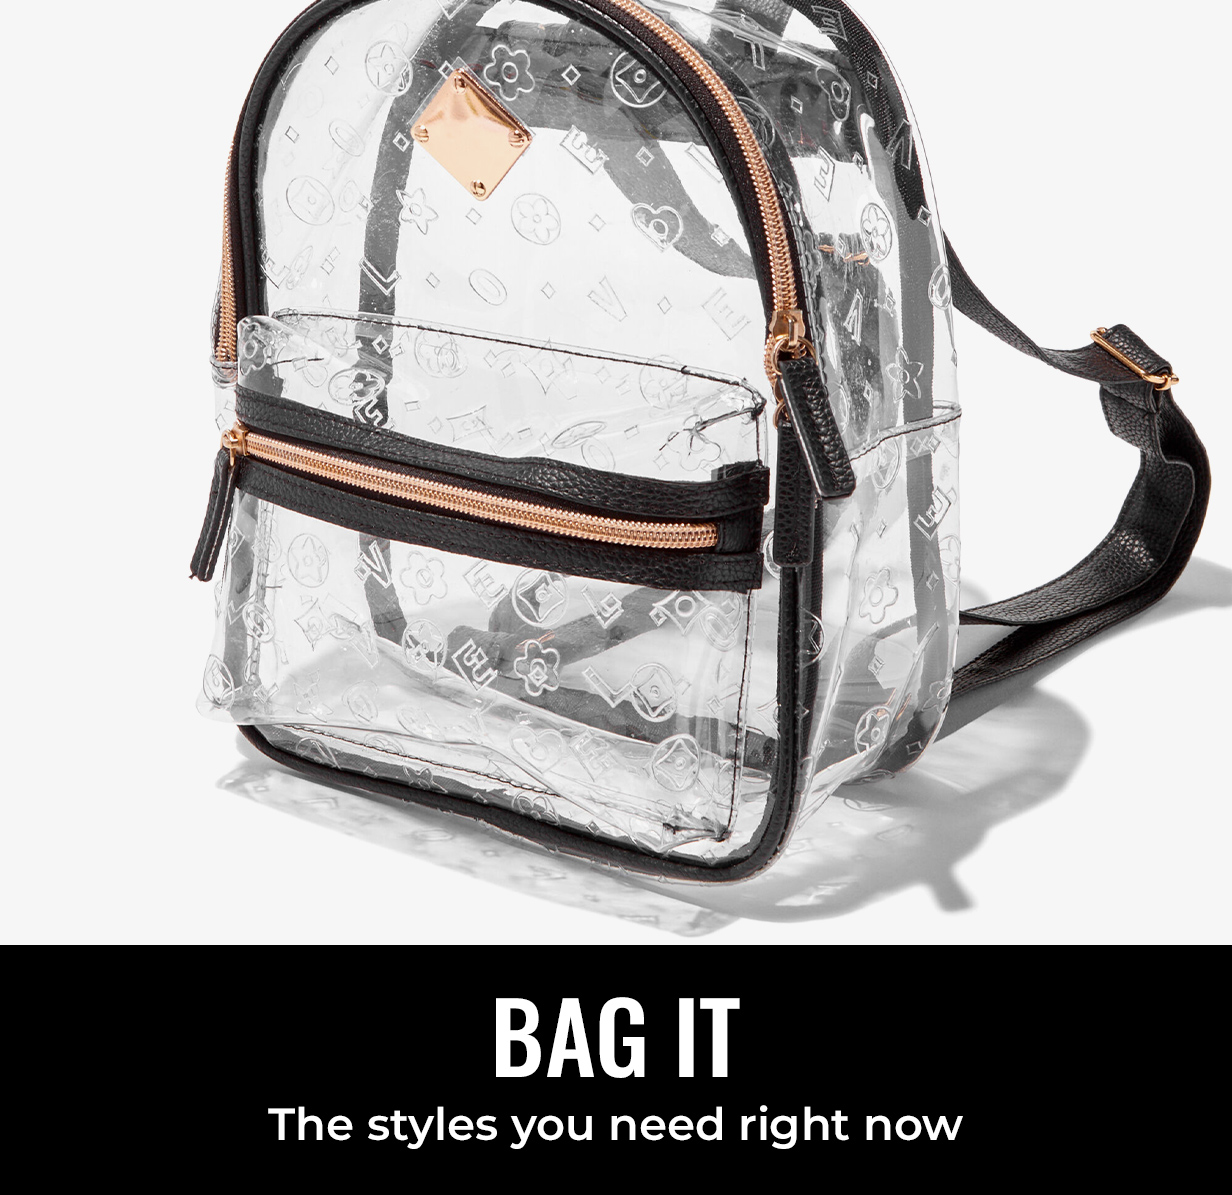 BAG IT - The styles you need right now